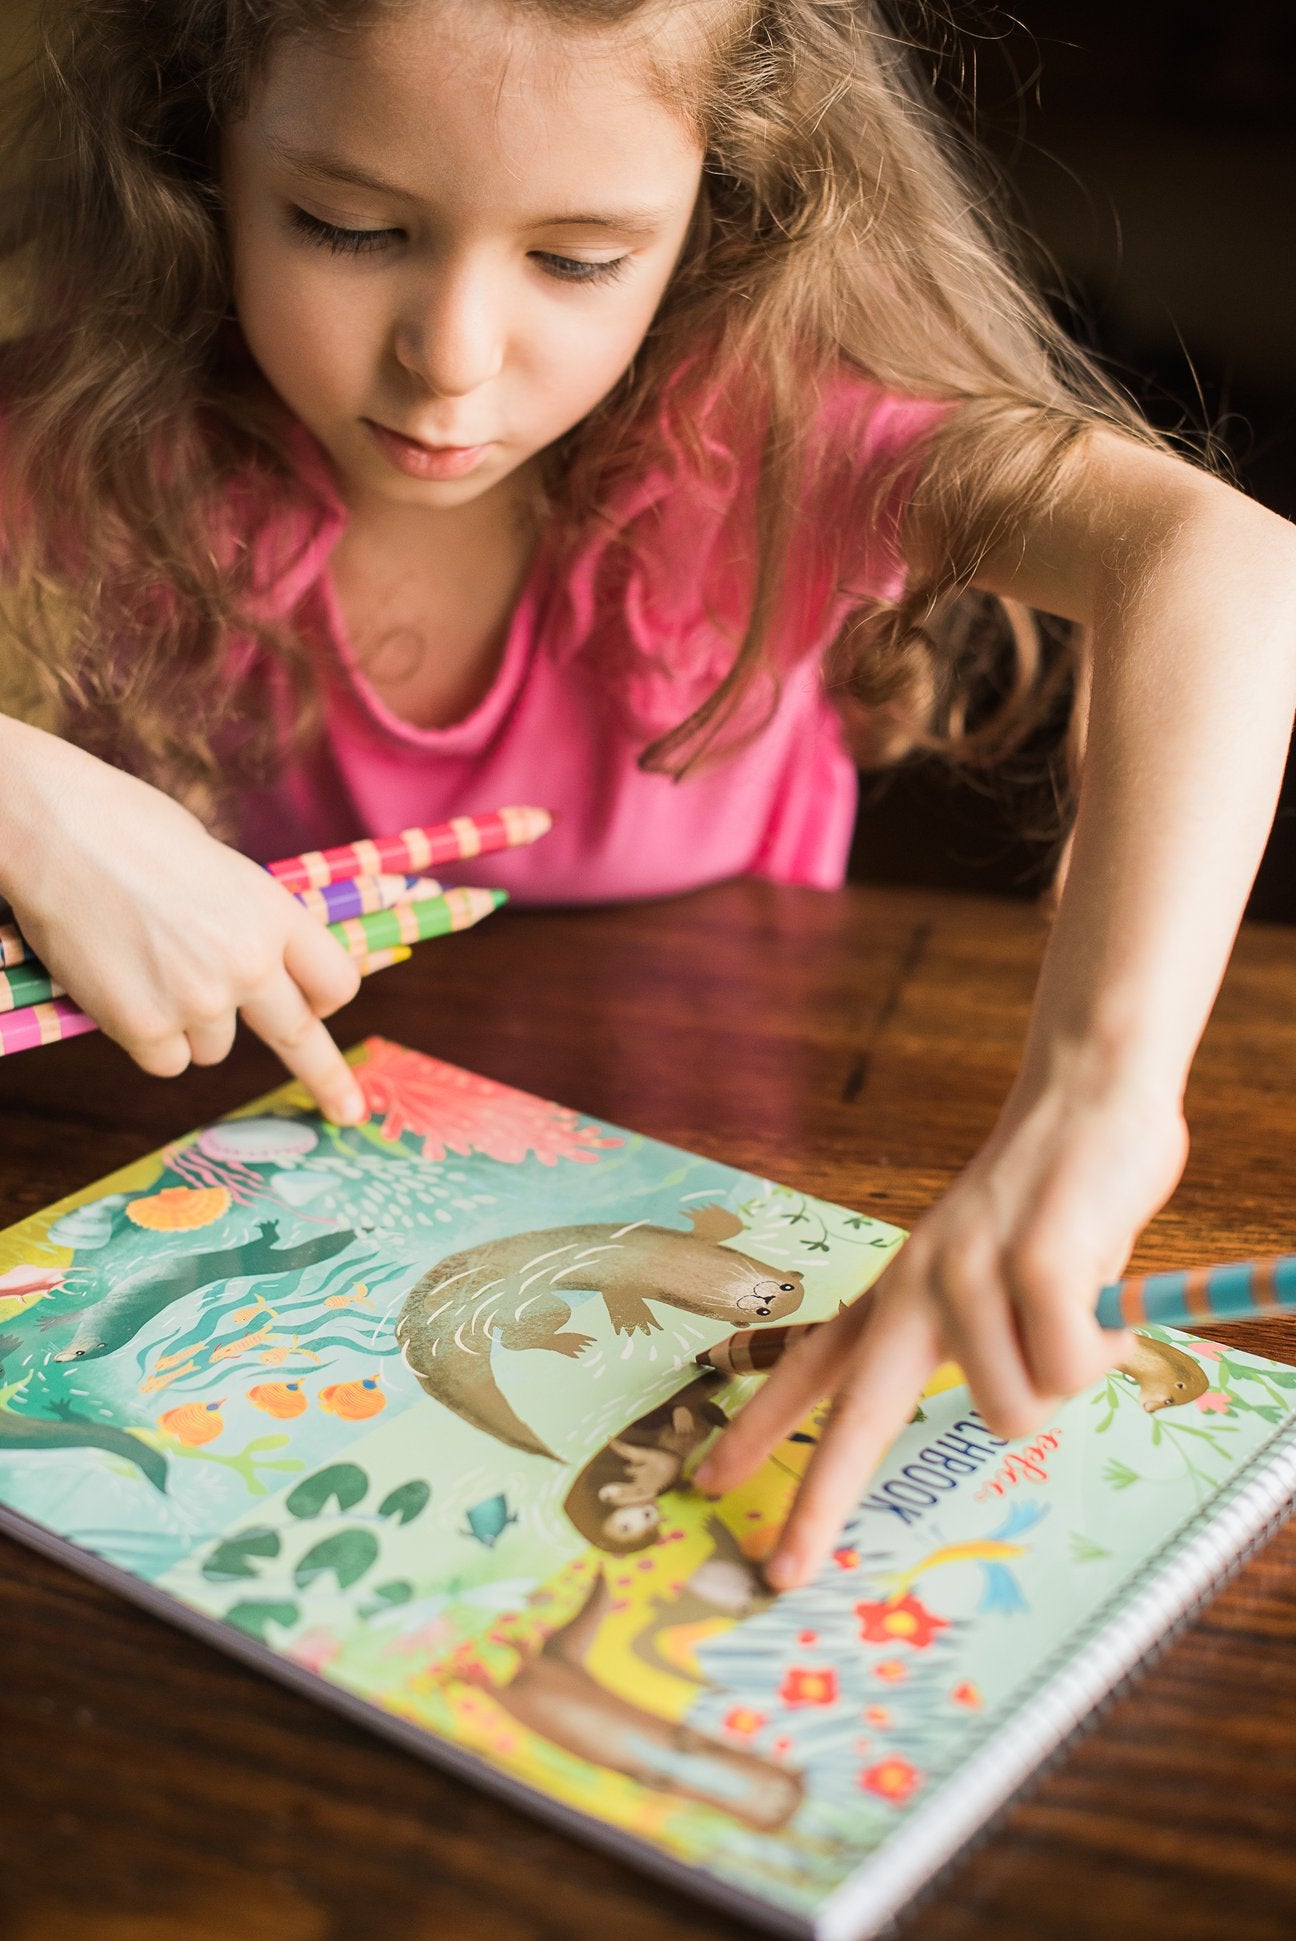 child wearing a pink shirt sitting at a table with an otters sketchbook